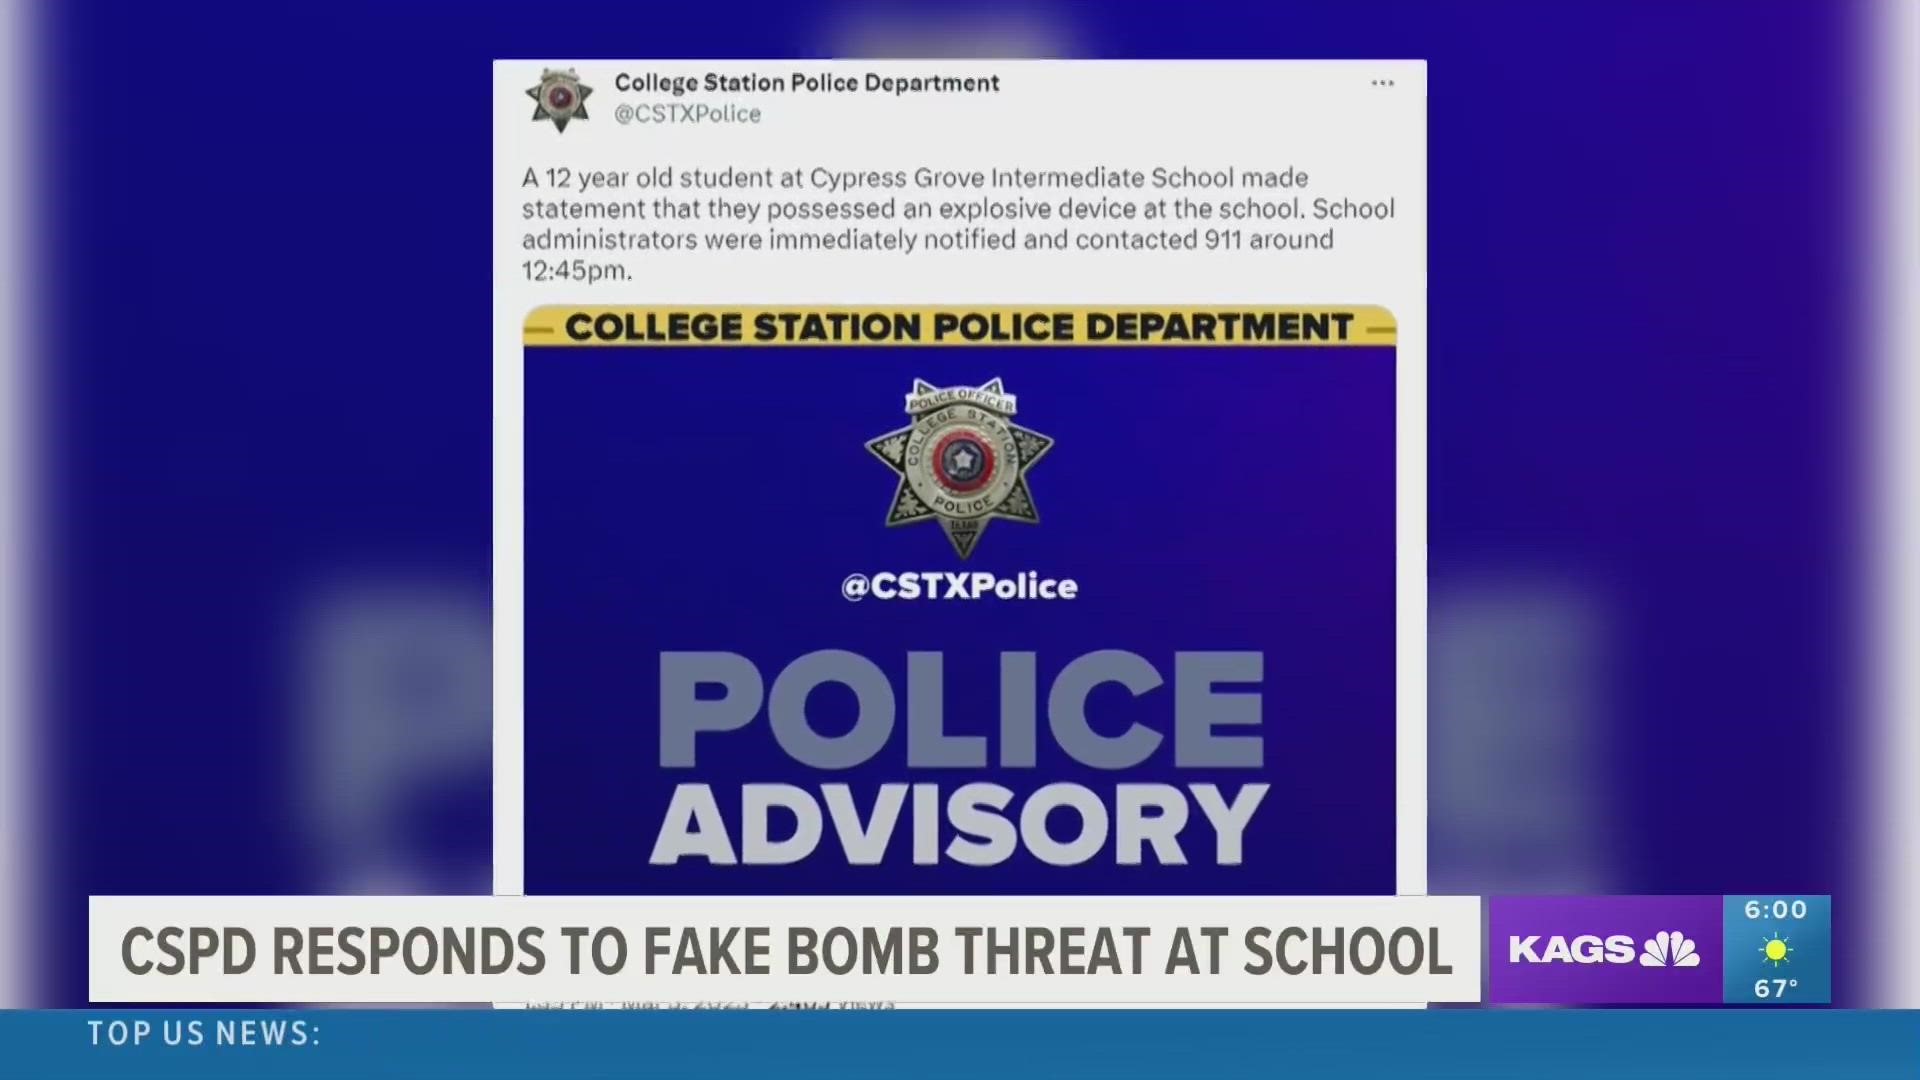 While the school was temporarily placed on lockdown, the order was soon lifted after a bomb was not found on school grounds.